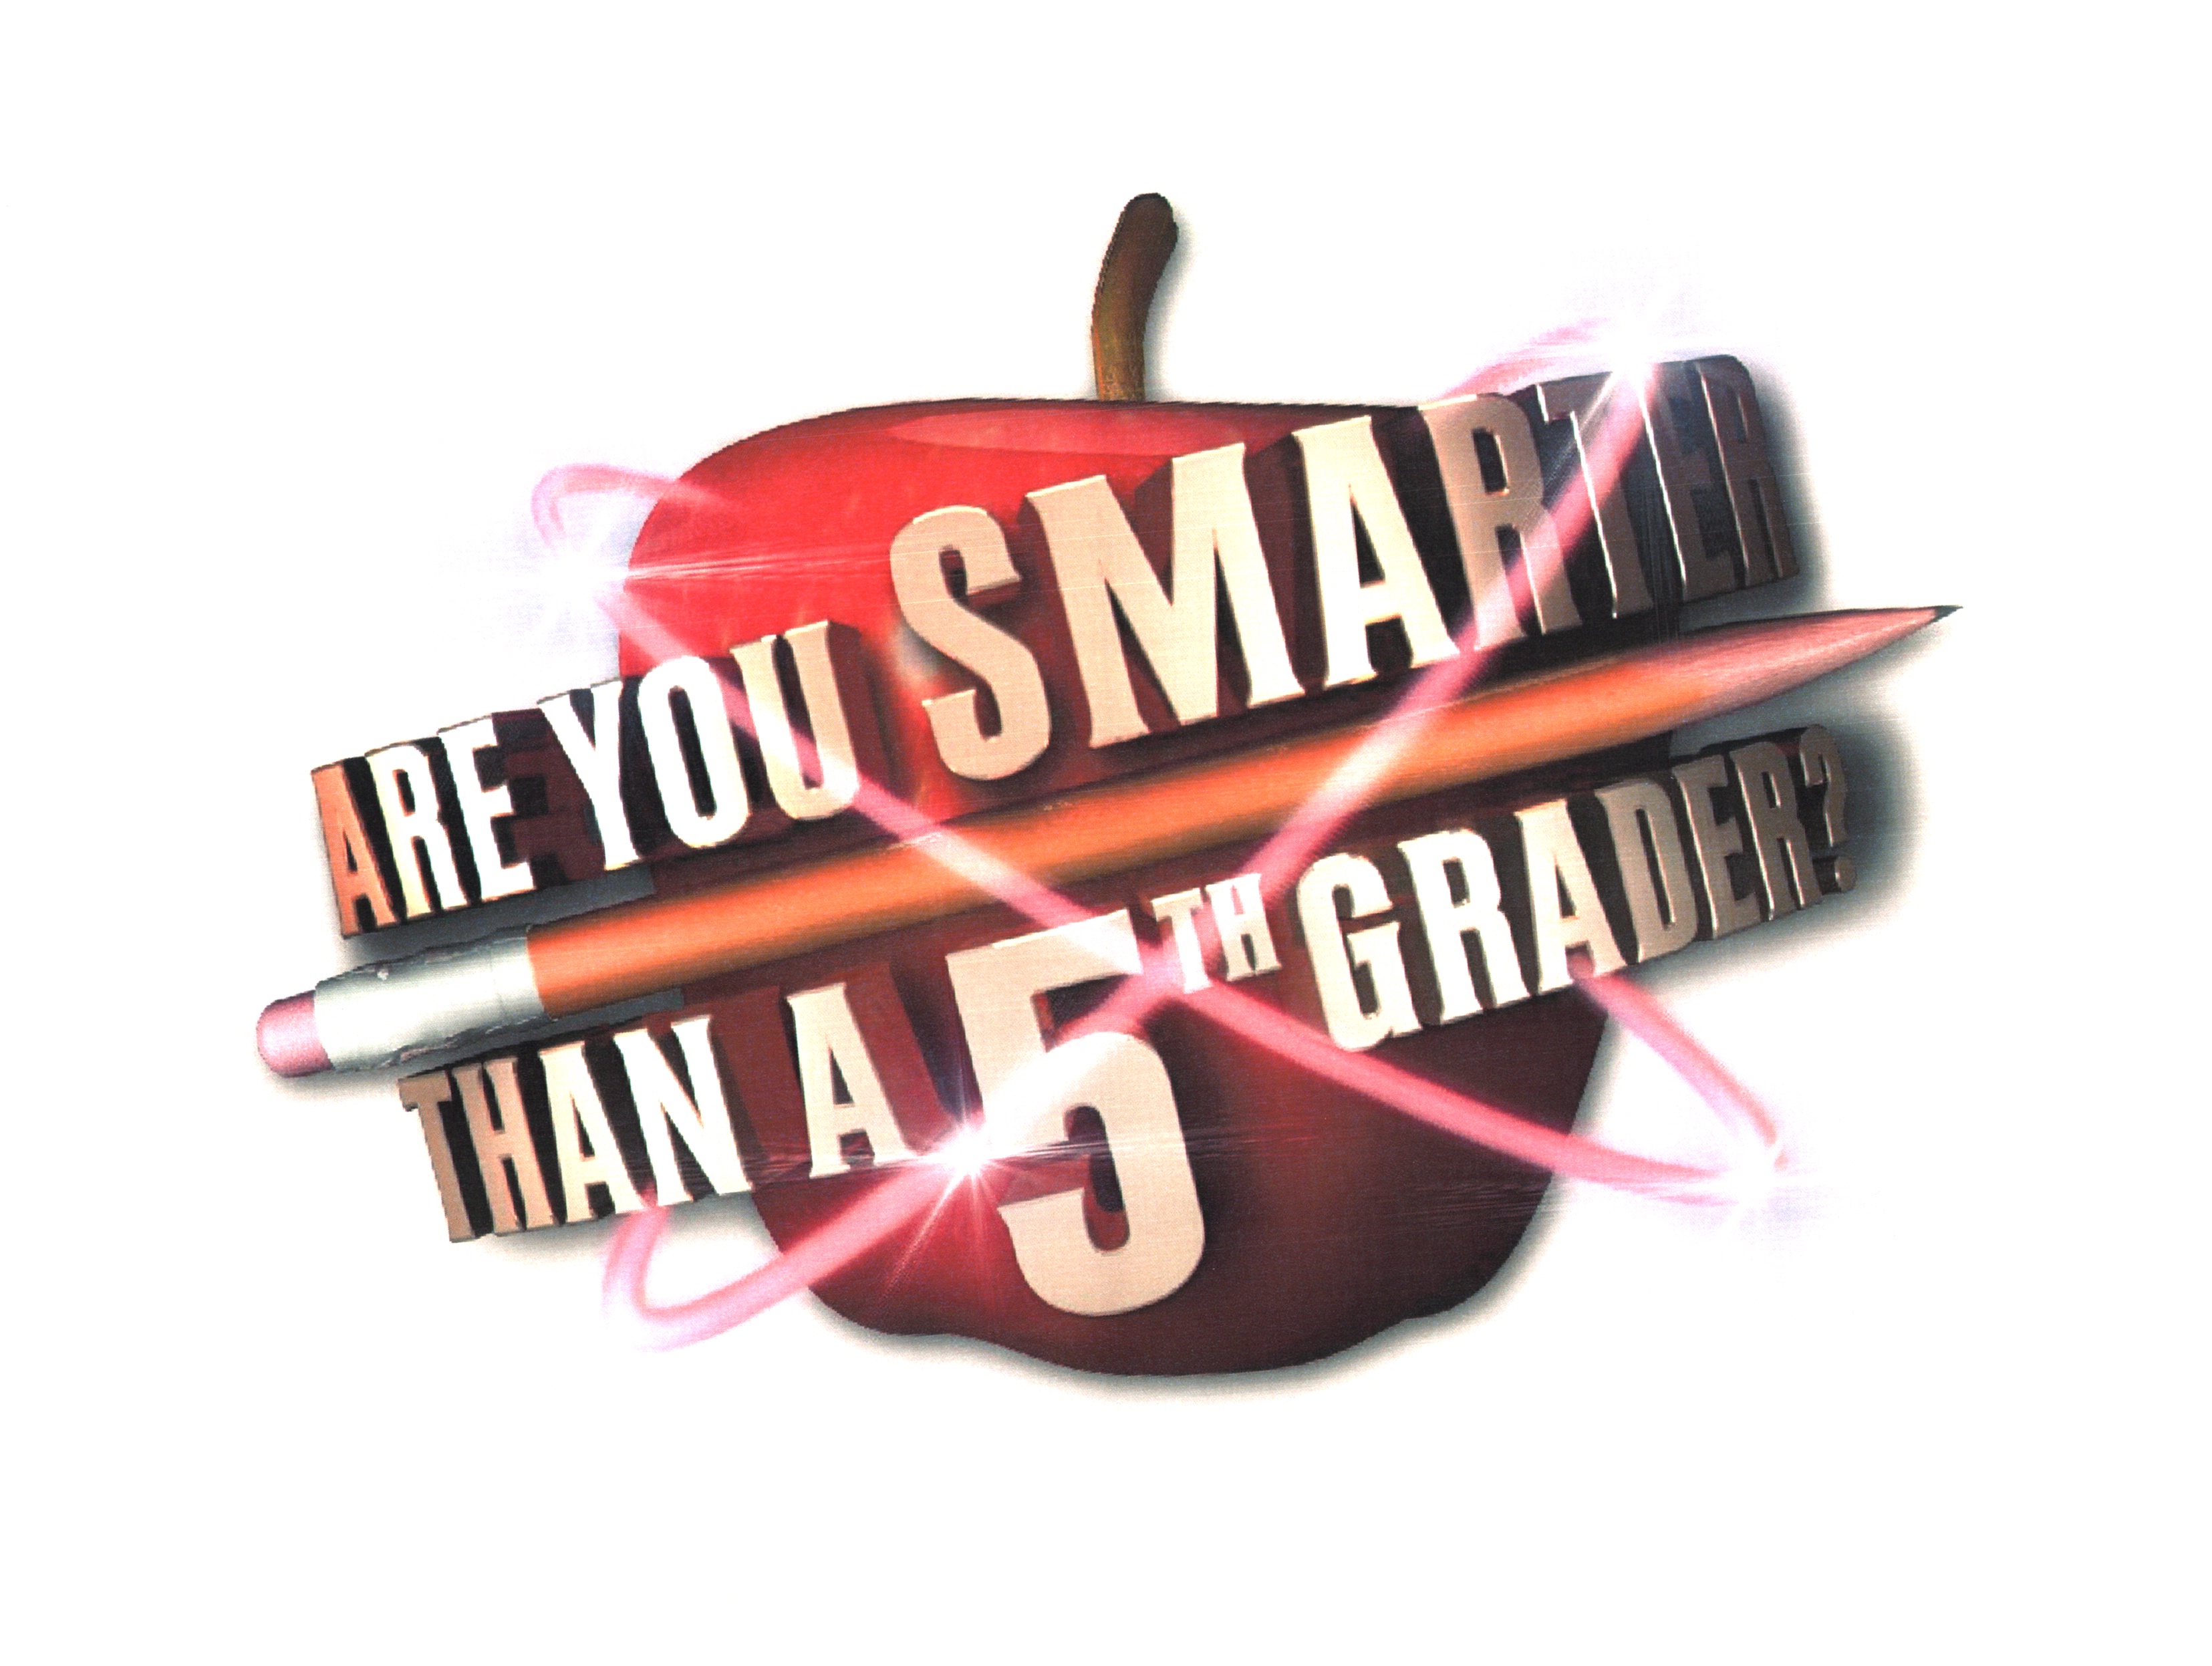 are-you-smarter-than-a-5th-grader-by-uamg-content-llc-1185231